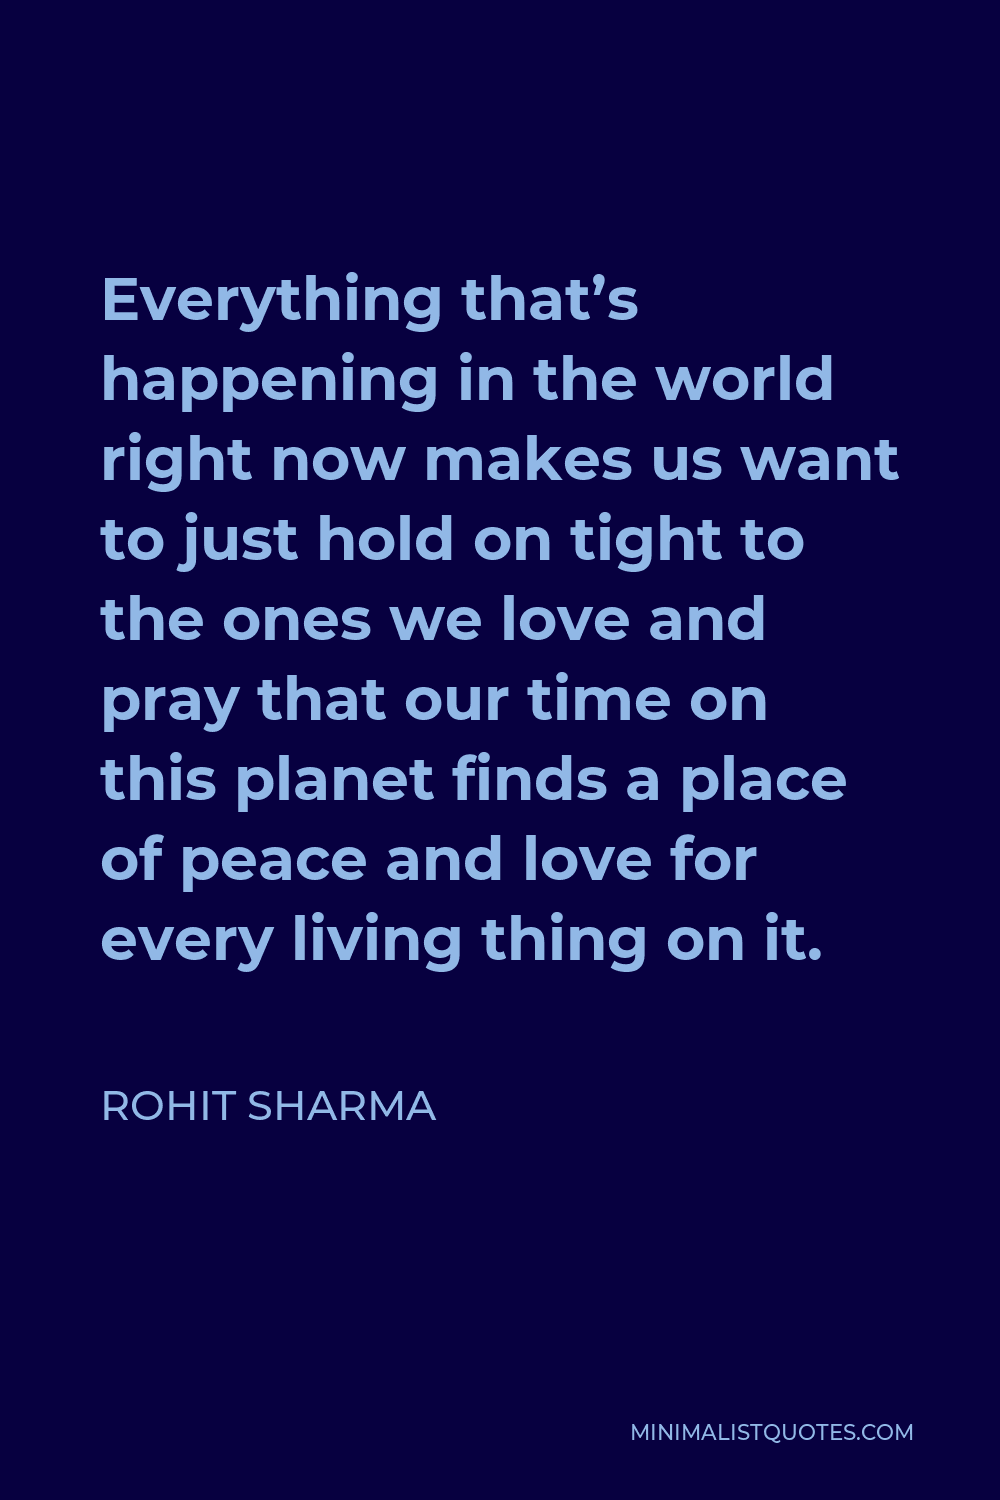 Rohit Sharma Quote - Everything that’s happening in the world right now makes us want to just hold on tight to the ones we love and pray that our time on this planet finds a place of peace and love for every living thing on it.